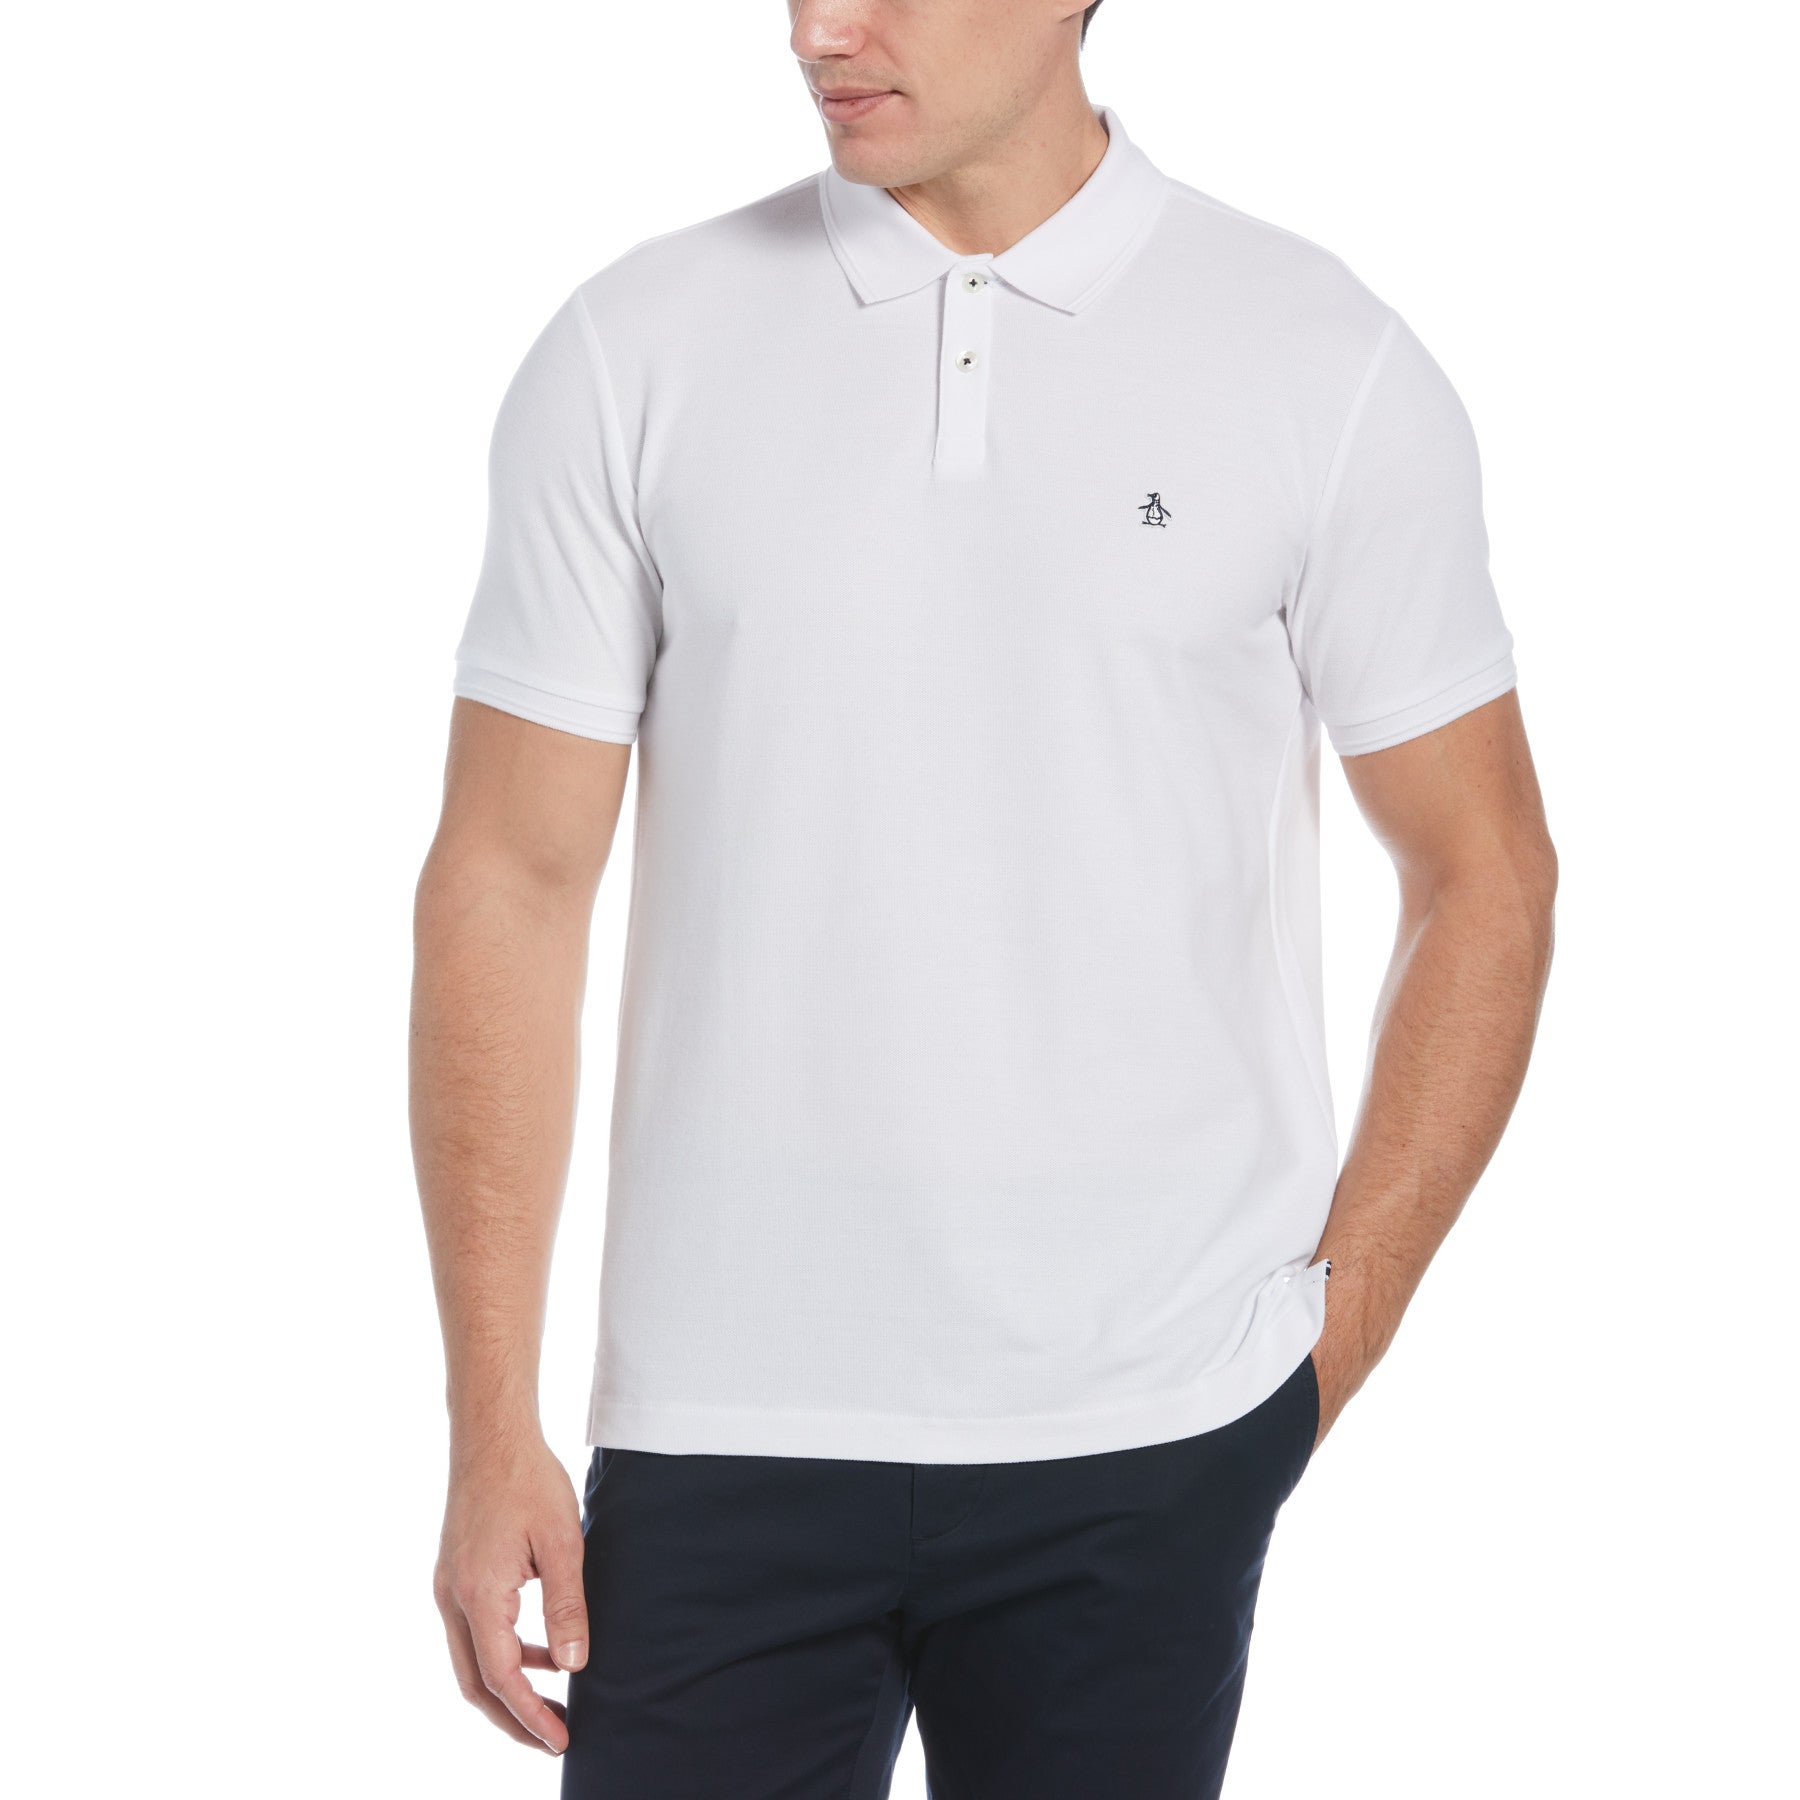 View Daddy Organic Cotton Polo Shirt In Bright White information